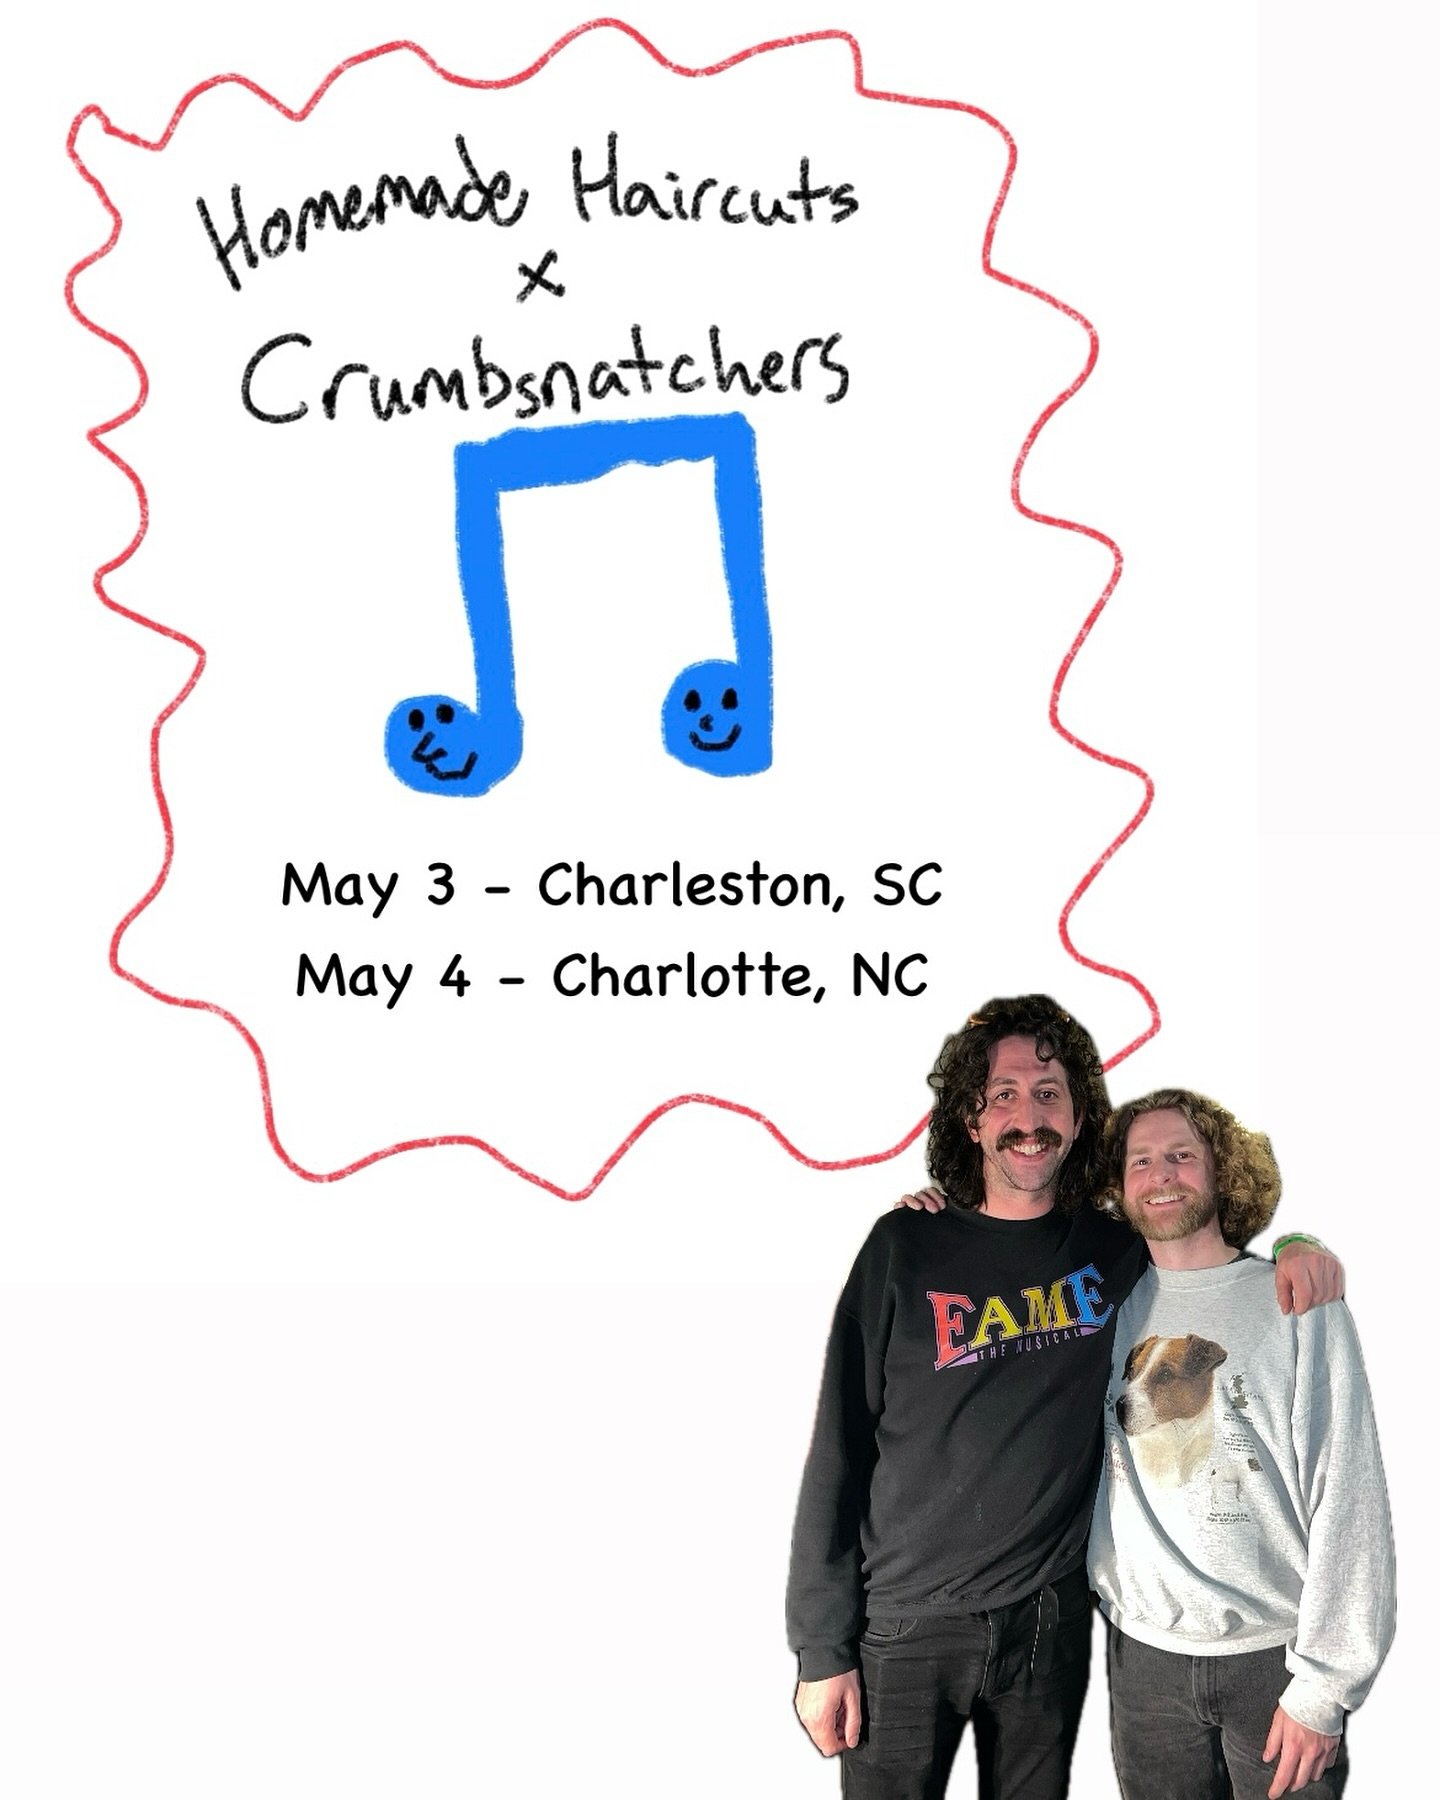 wholesome news! we&rsquo;re linking with Nashville&rsquo;s own @crumbsnatchersband for TWO Carolina shows ✌🏻

5/3&bull; Charleston, SC @theroyalamerican 
5/4 &bull; Charlotte, NC @provideduptown 

Planning some fun, one-of-a-kind sets for these! Sto